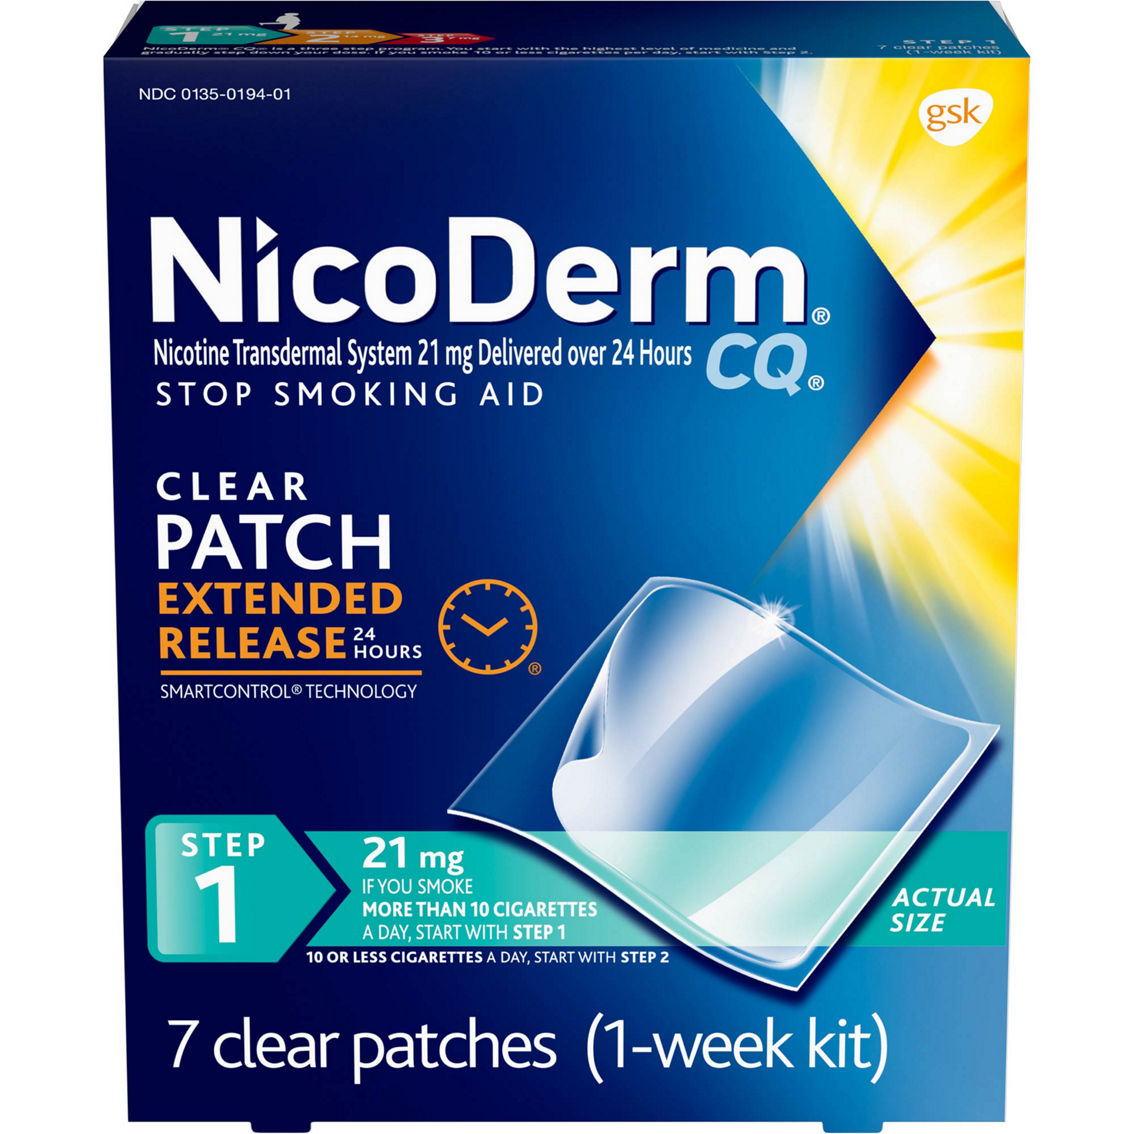 Nicoderm Cq Clear Patch Step 1 21mg Stop Smoking Aid Quit